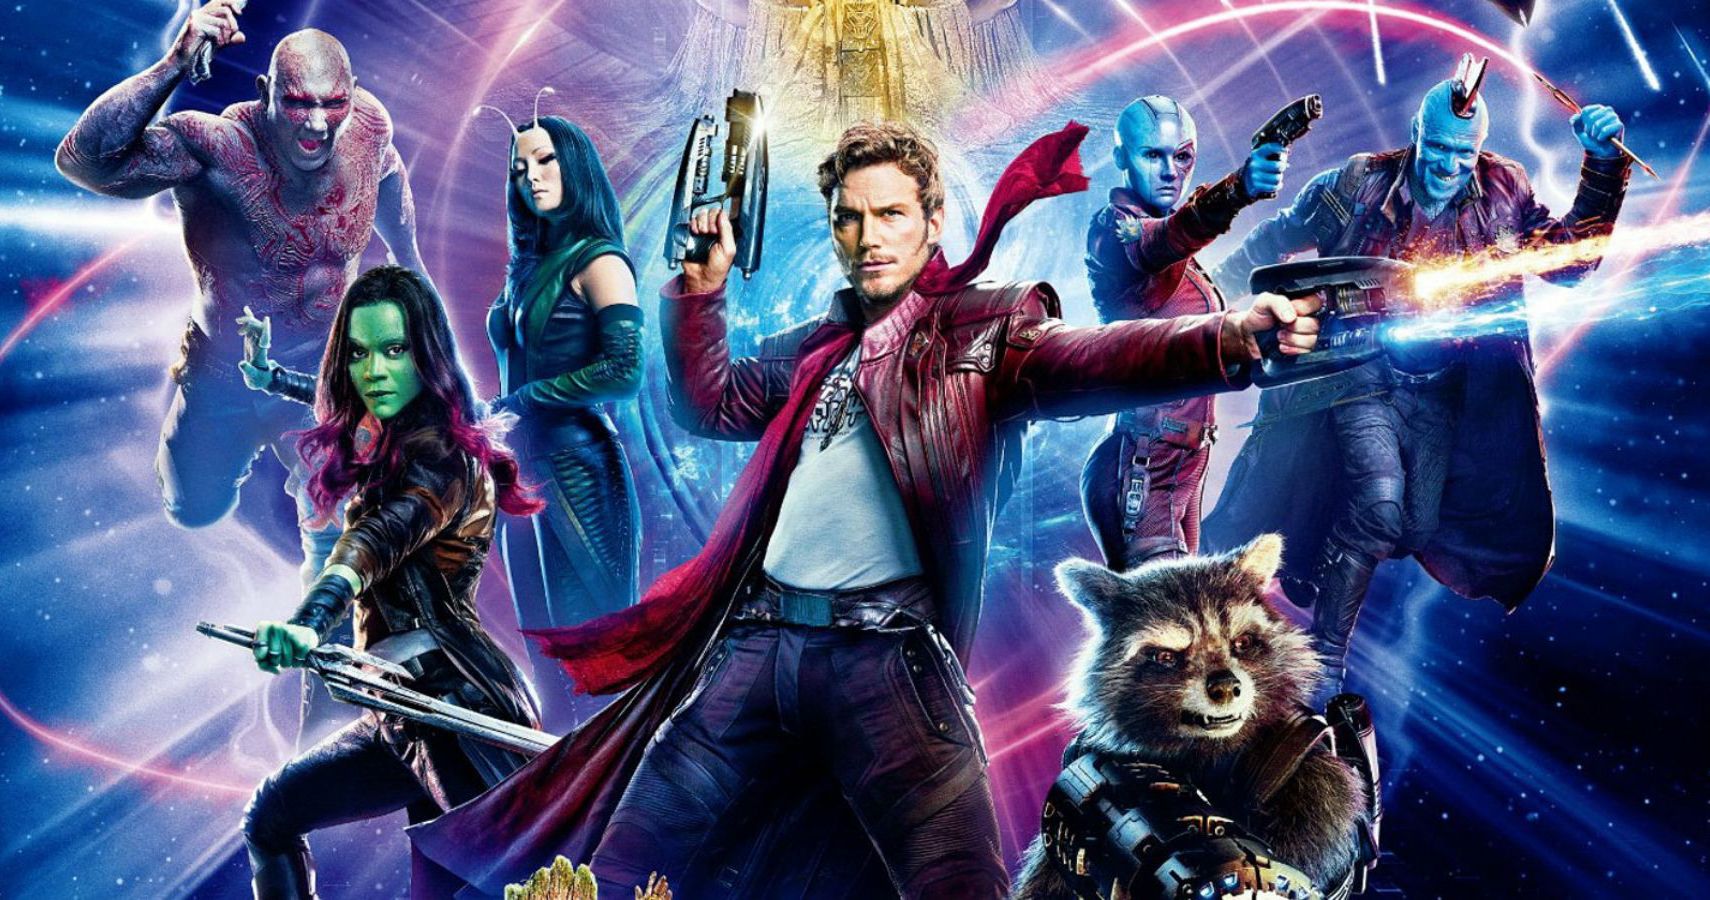 Guardians of the Galaxy Vol 3 free